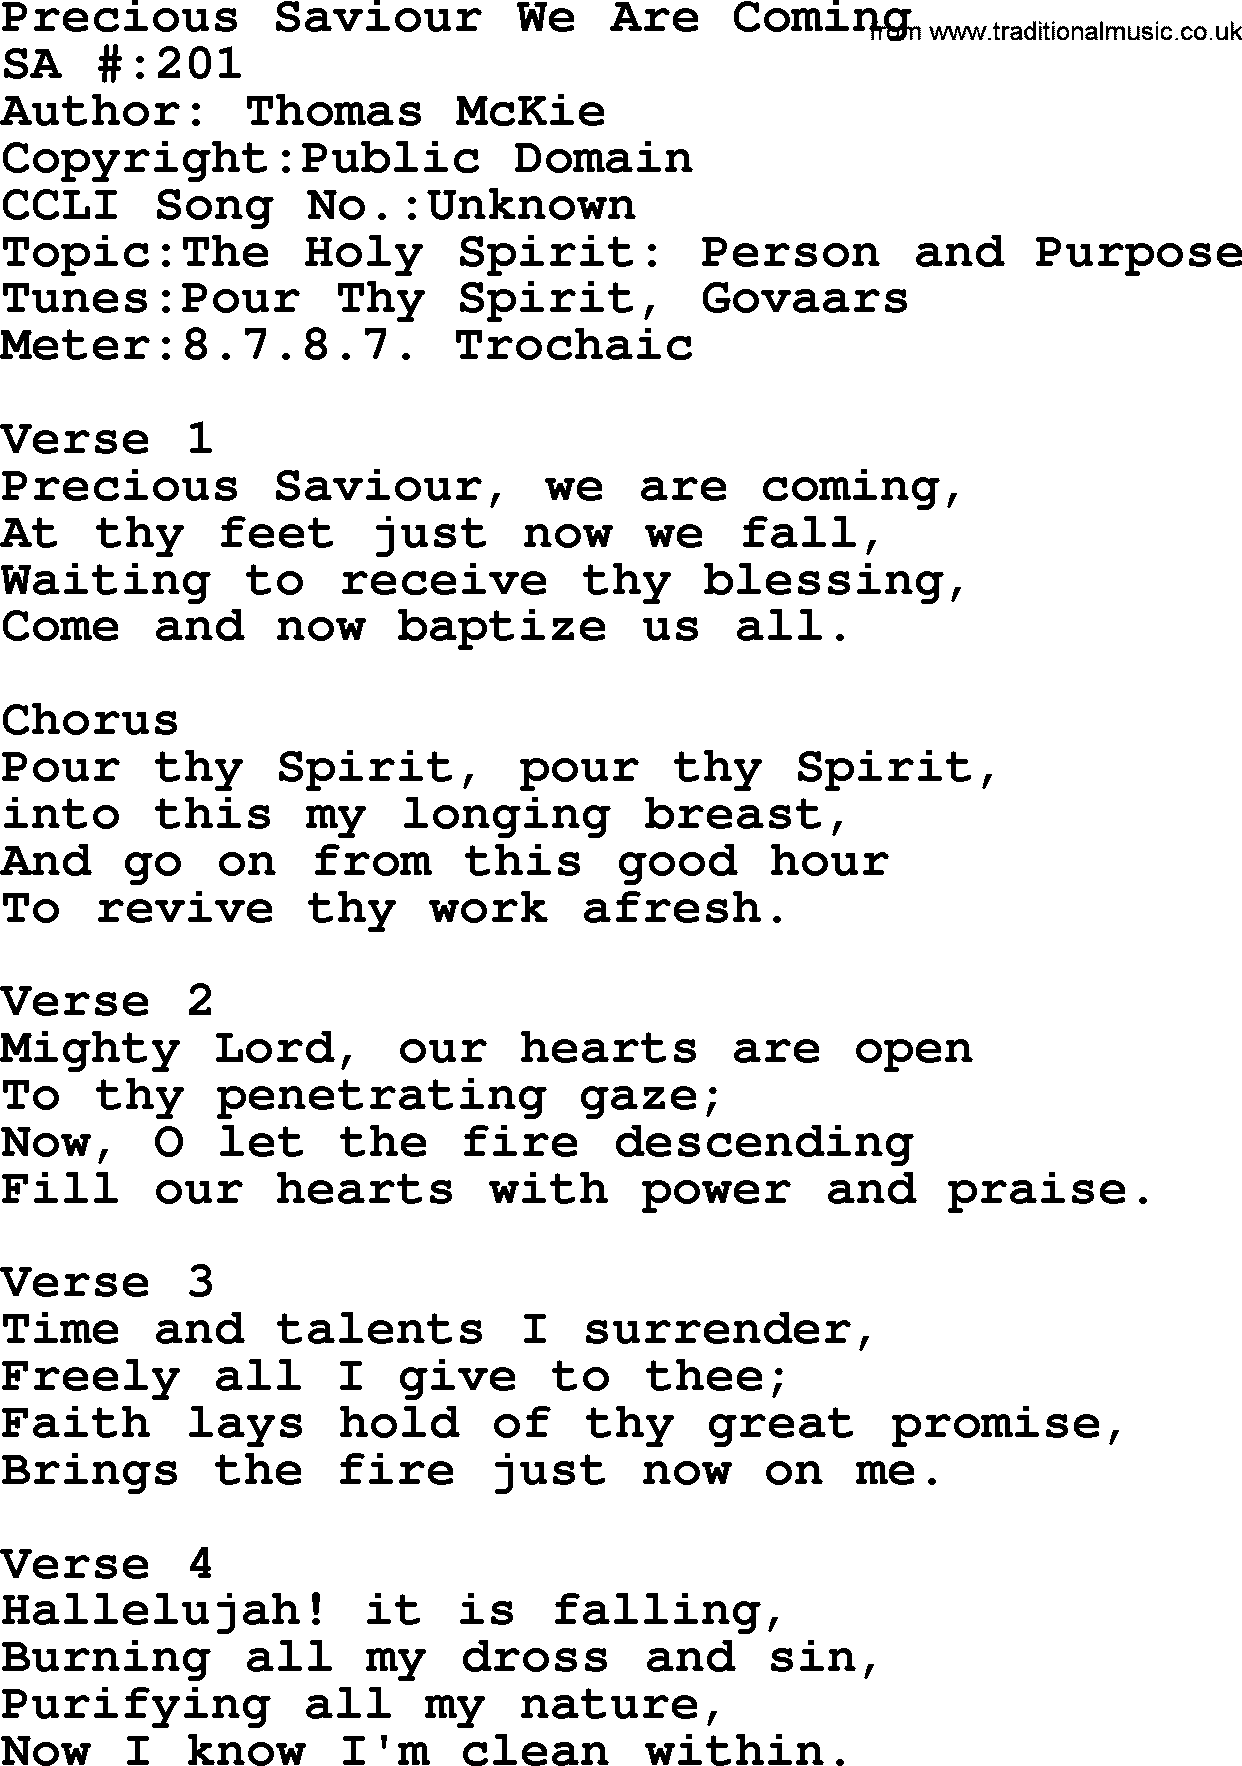 Salvation Army Hymnal, title: Precious Saviour We Are Coming, with lyrics and PDF,